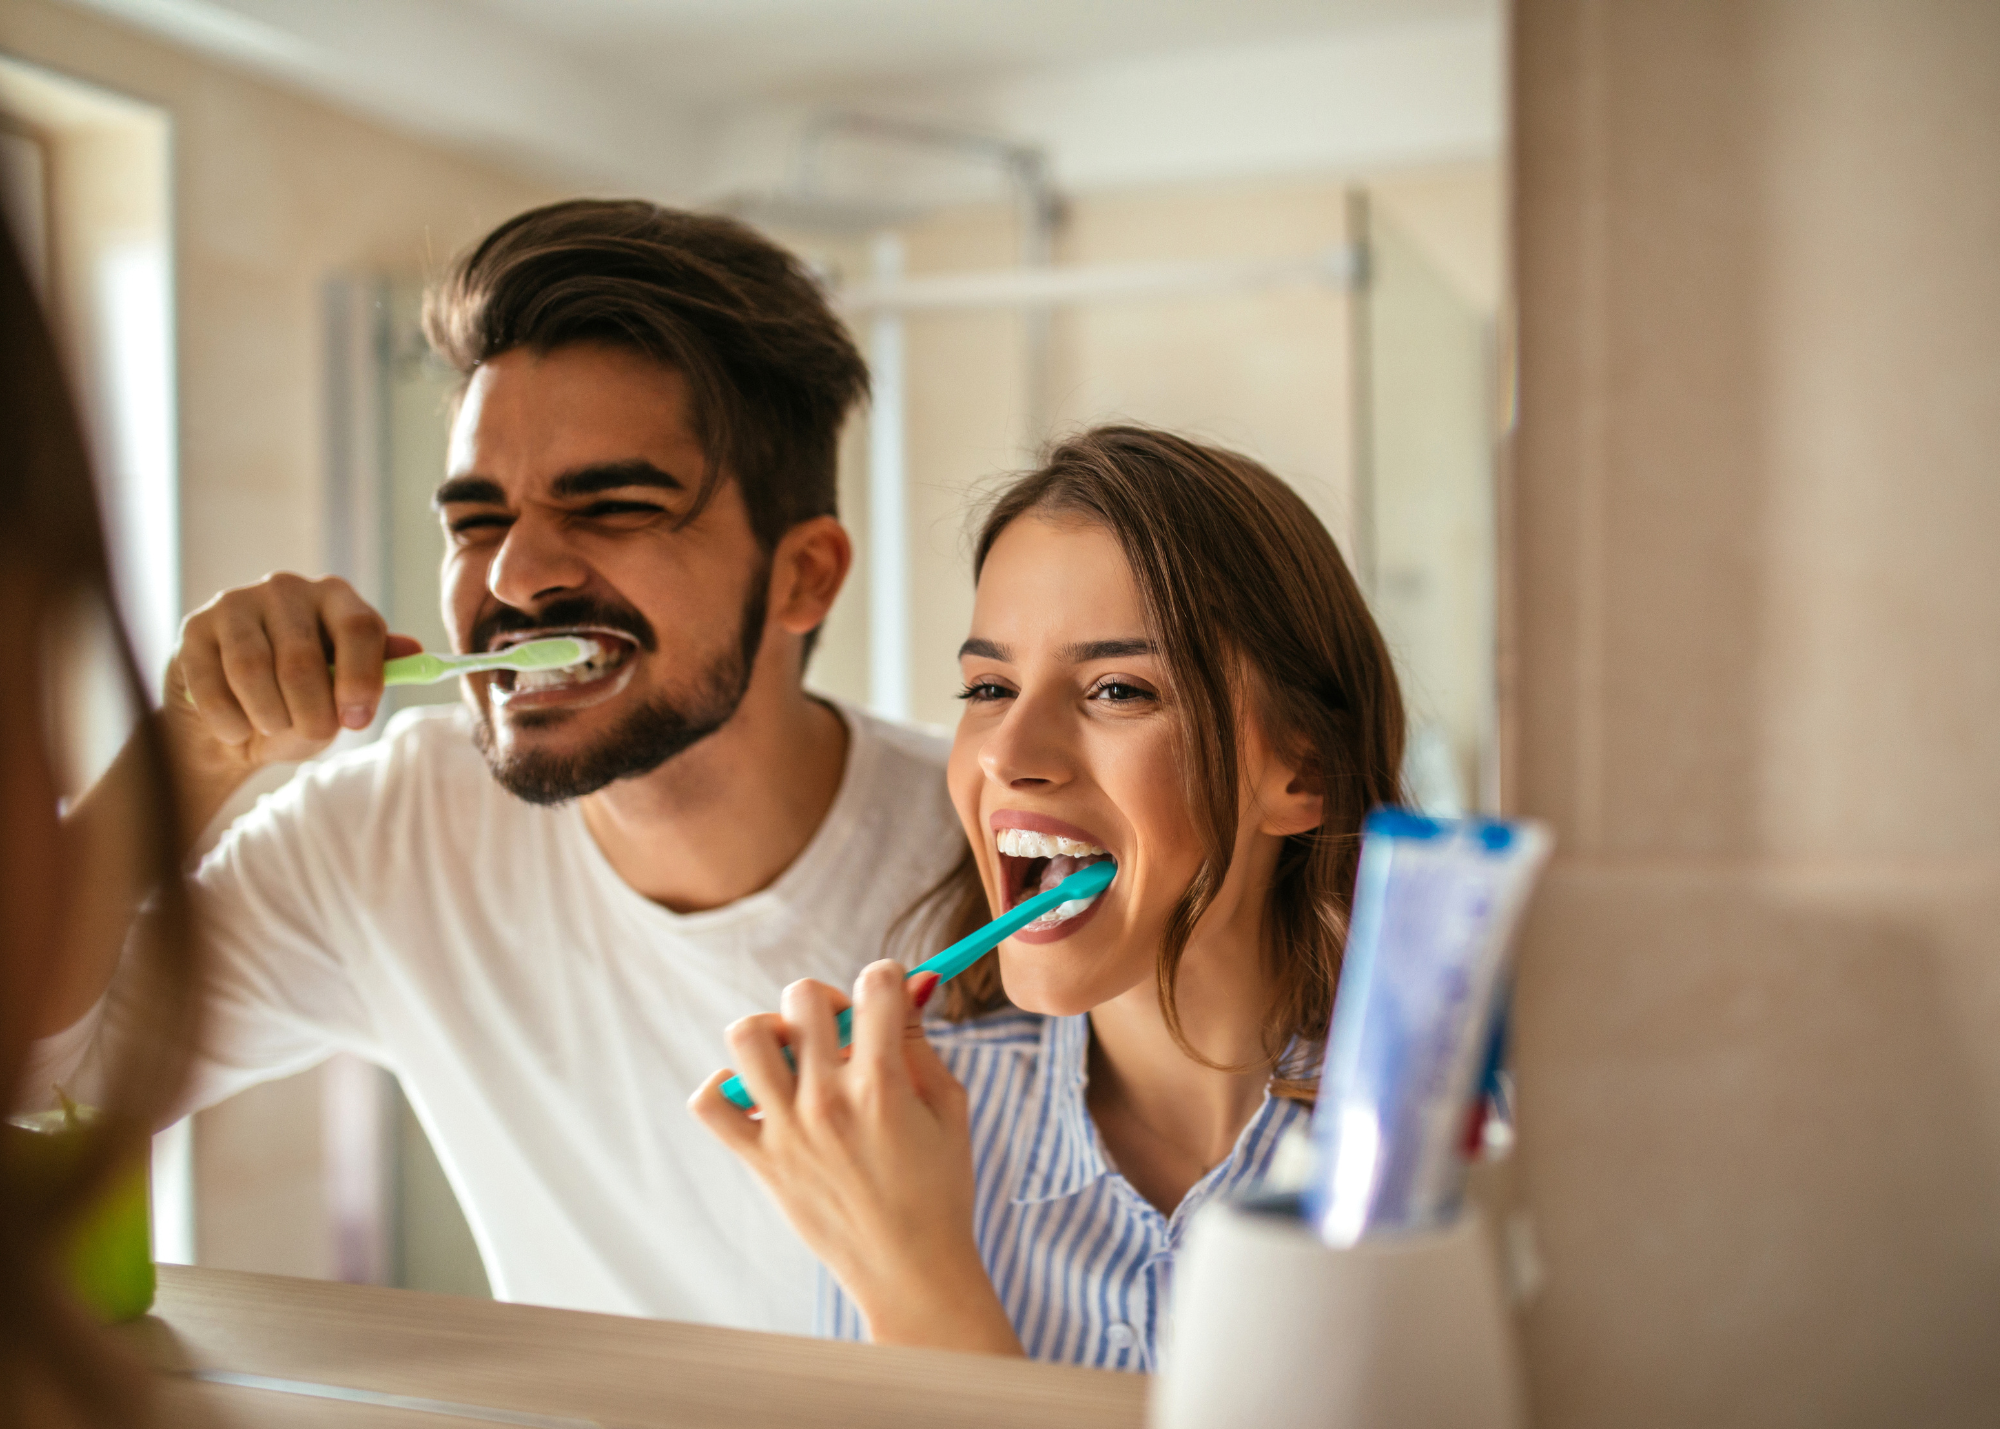 Electric Toothbrush: A Mouthful of Innovation